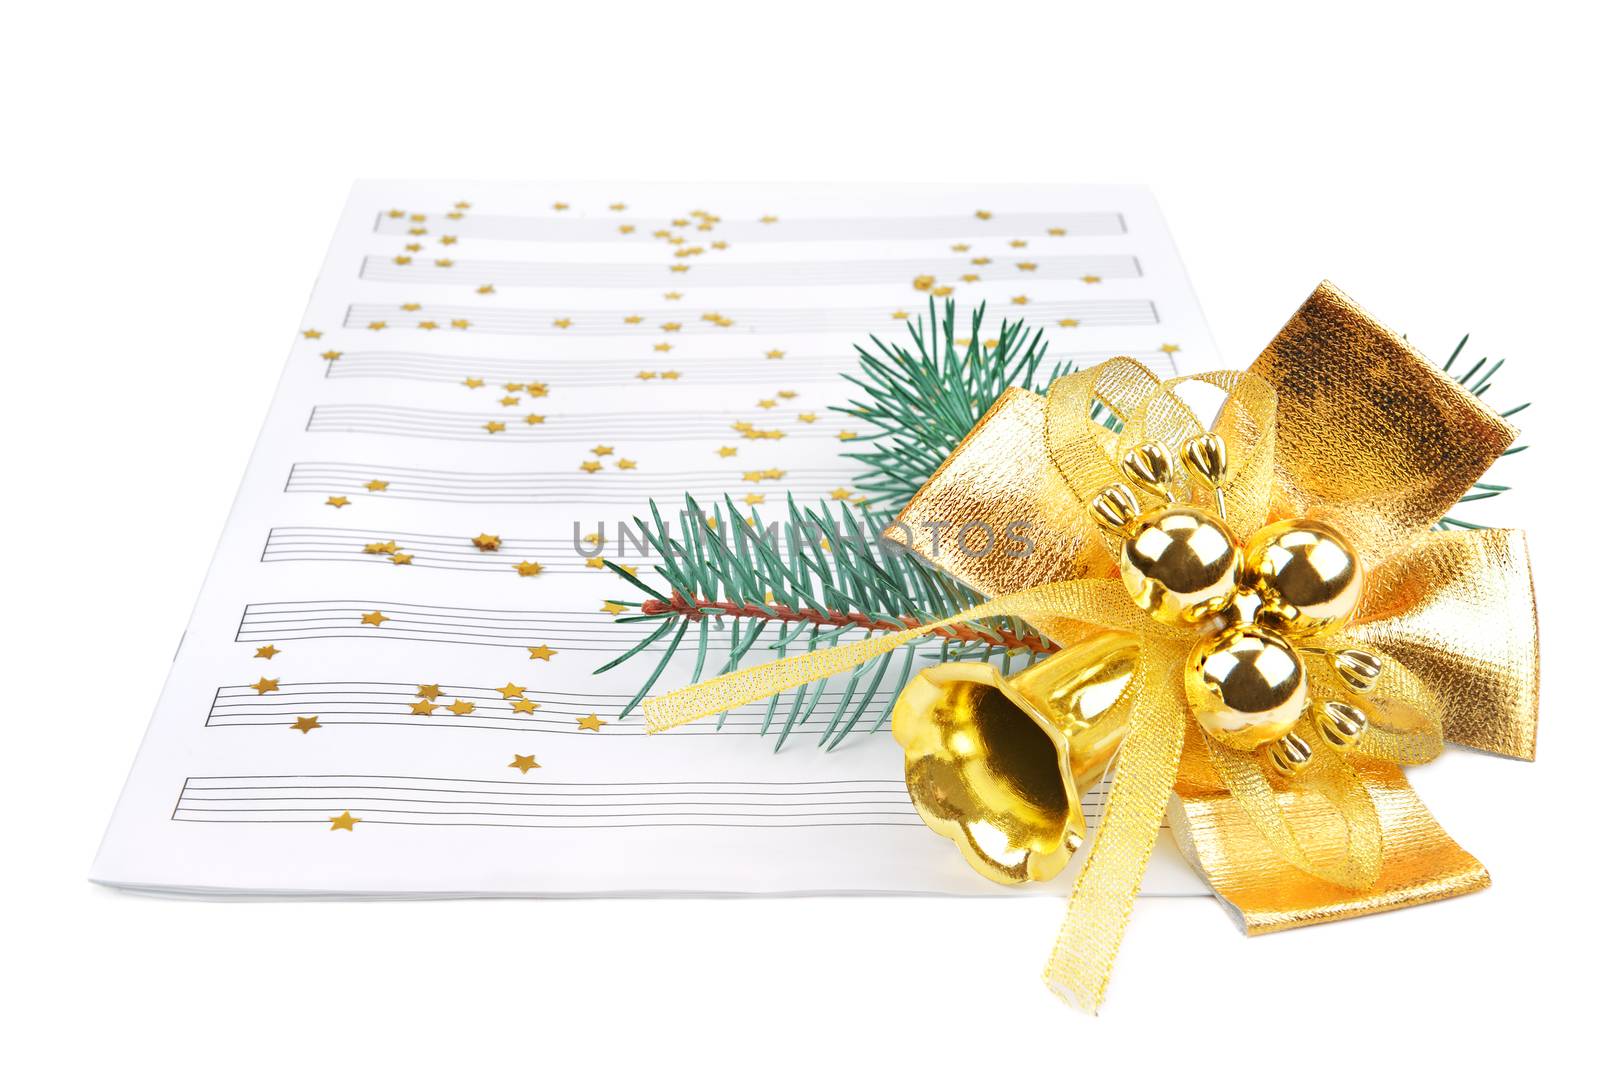 Christmas decorations and music sheet isolated on white background